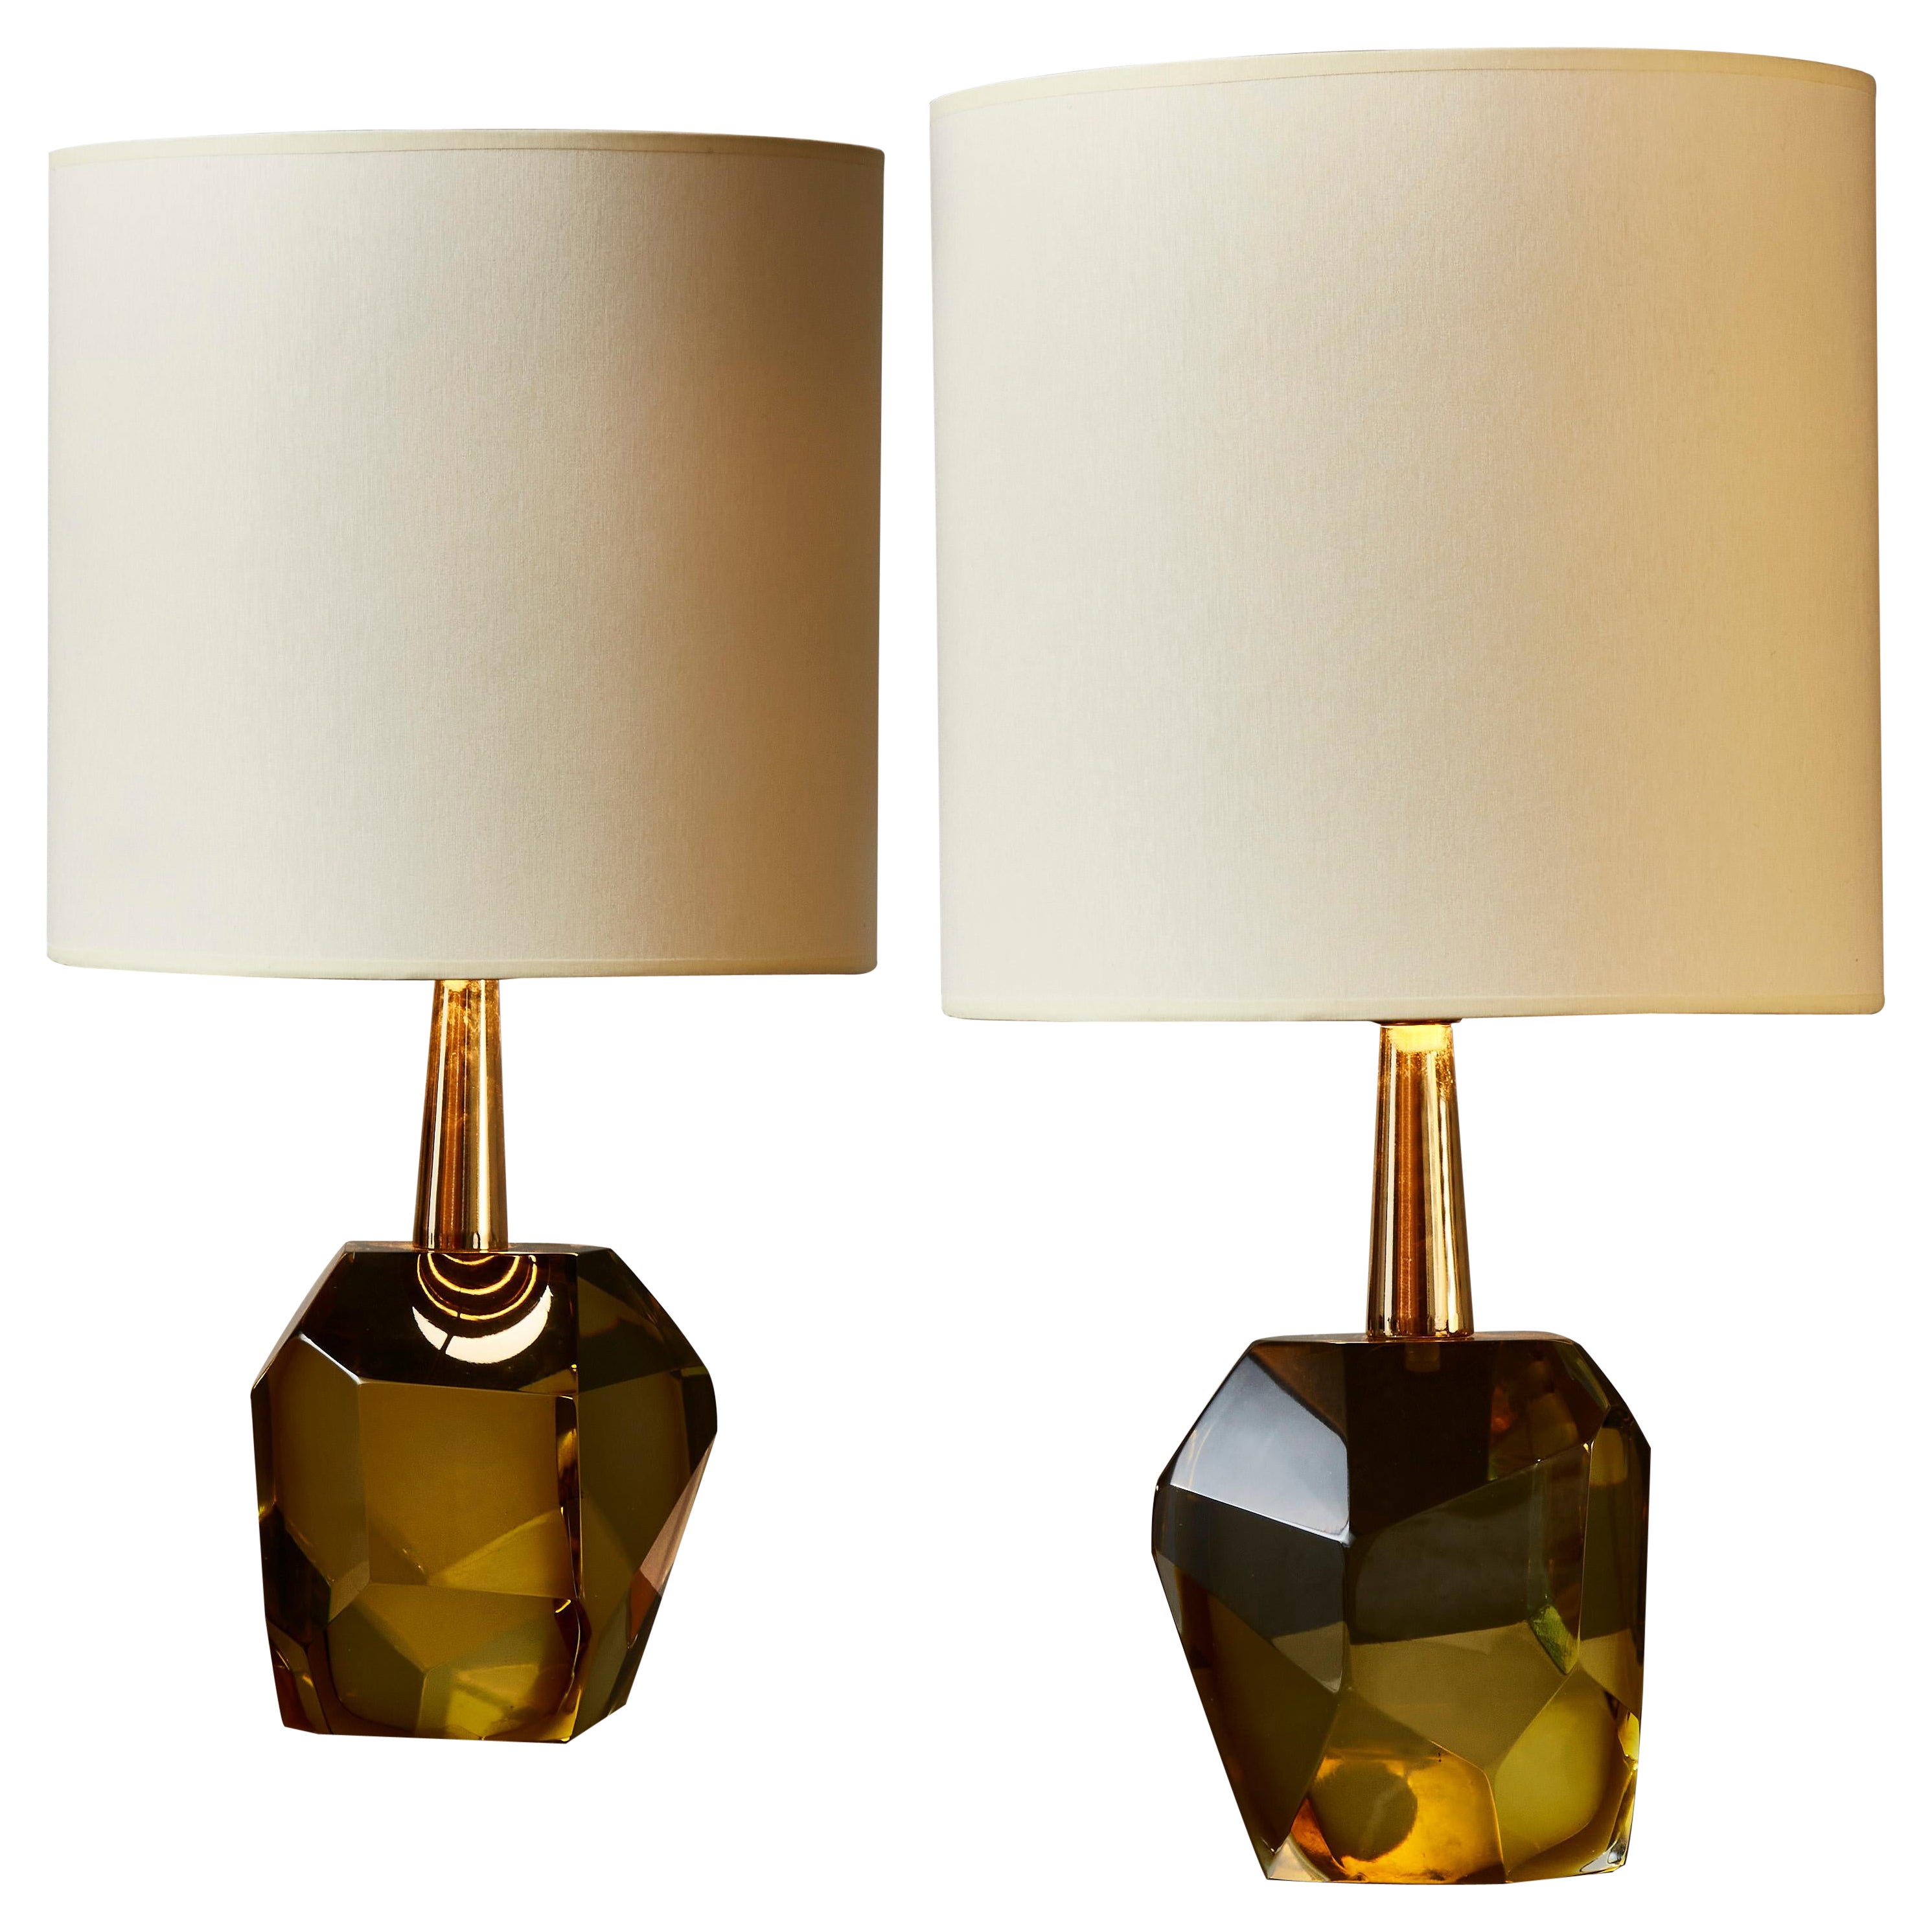 Pair of Cut-Glass Table Lamps For Sale at 1stDibs